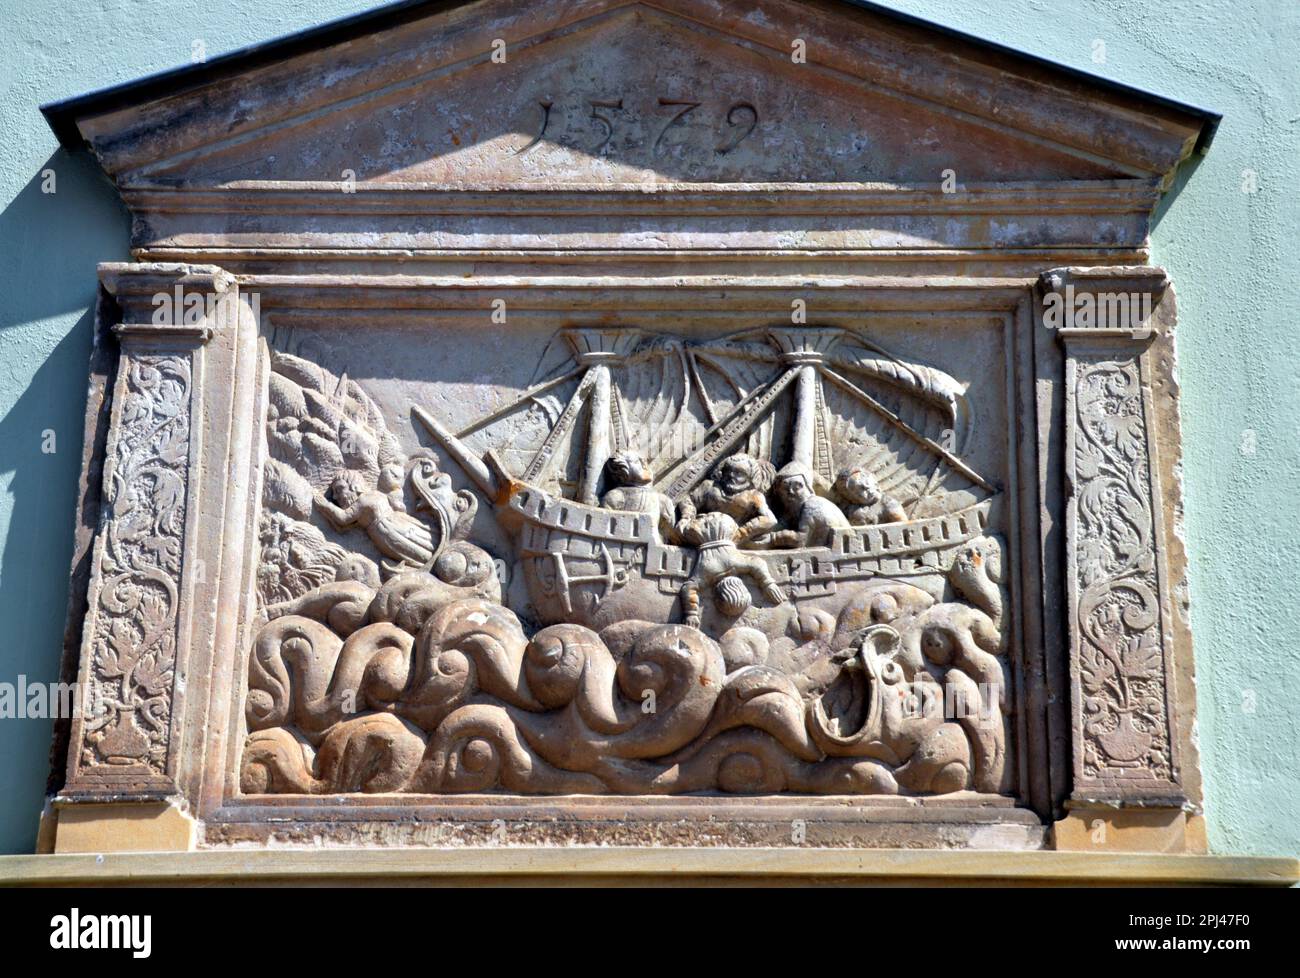 Germany, Saxony, Pirna:  mediaeval stone relief (1579) showing the Bible scene of Jonah being thrown overboard. Stock Photo